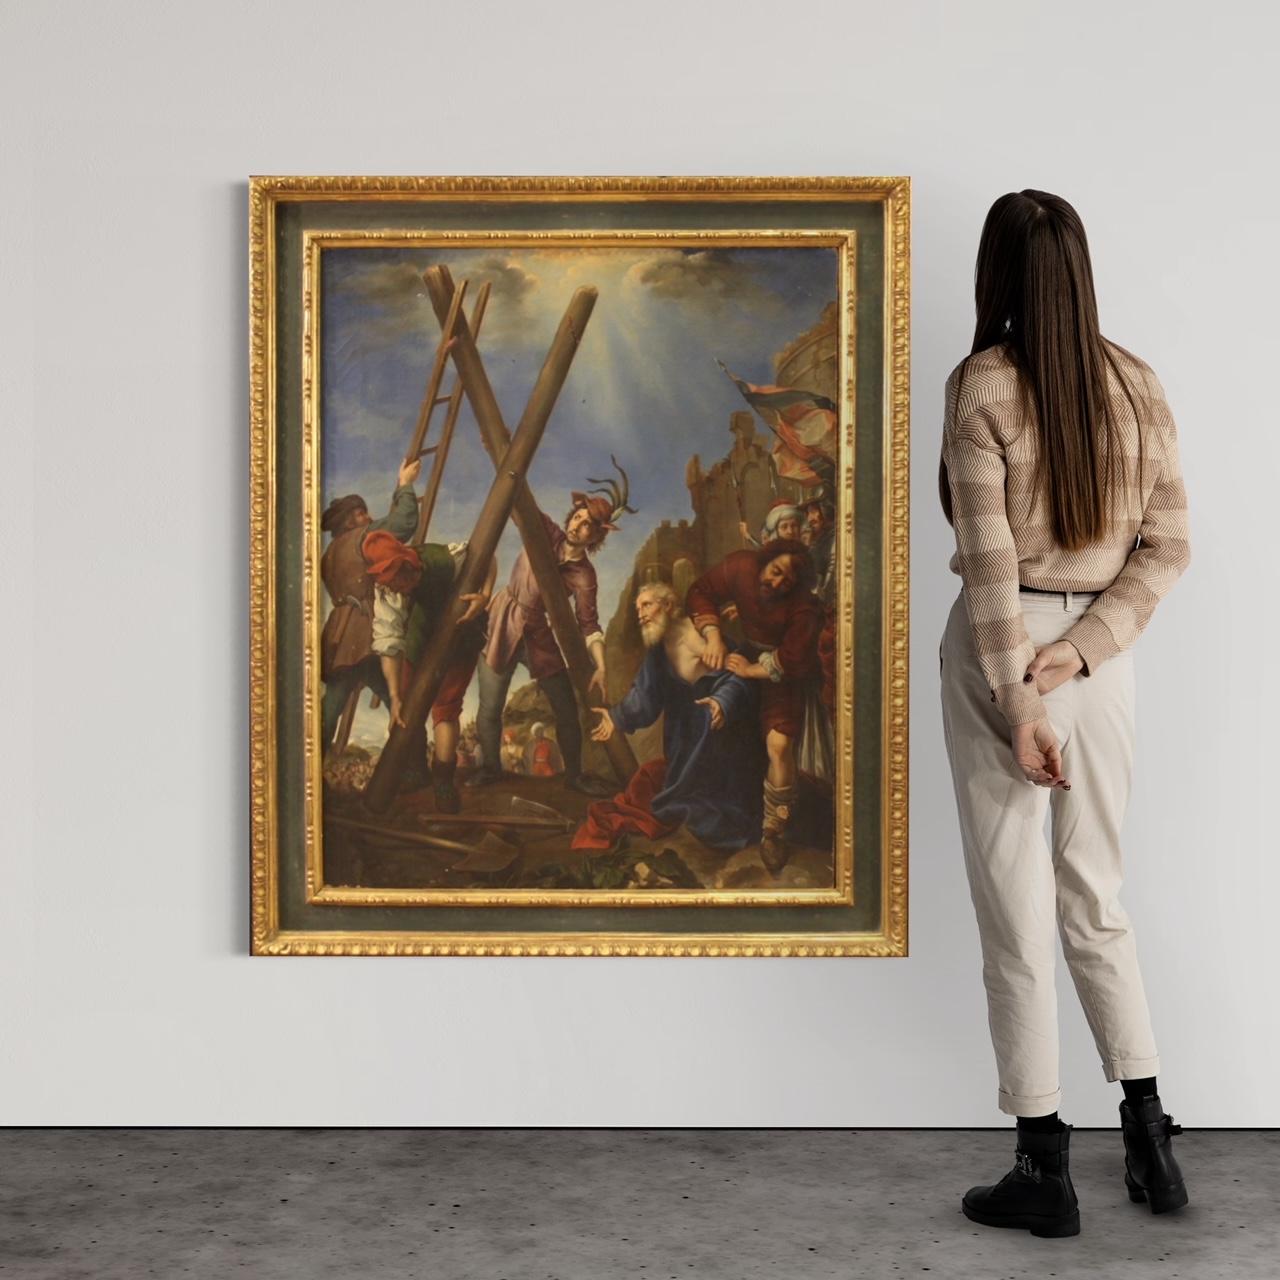 Antique Italian painting from the mid-19th century. Oil on canvas artwork, first canvas, depicting religious subject, Martyrdom of Saint Andrew, nineteenth-century copy in 1 to 1 scale of the masterpiece by Carlo Dolci (1616-1687) now exhibited at